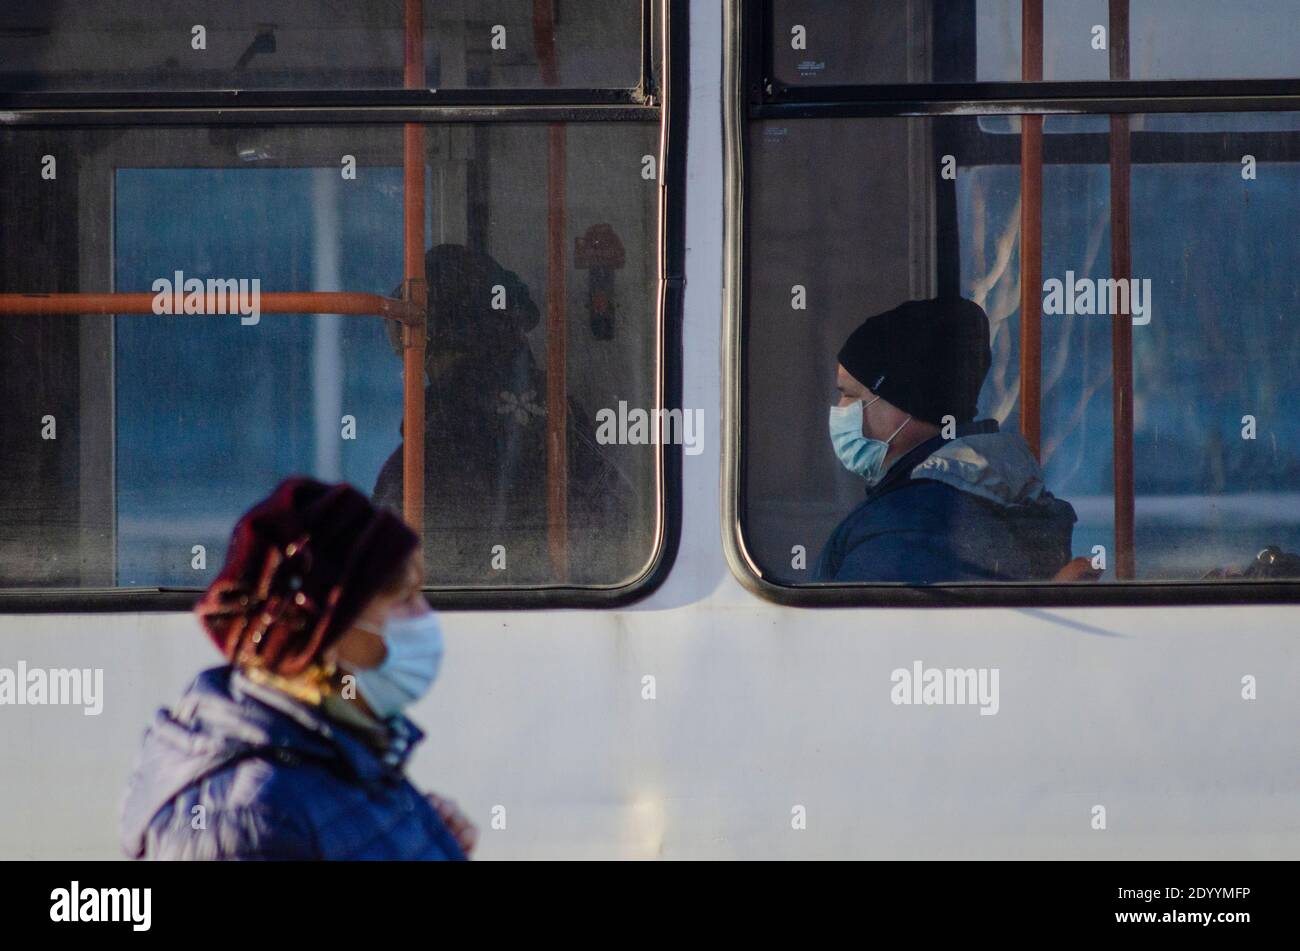 BUCHAREST, ROMANIA - 28 December 2020 - Passengers wearing facemasks on a tram as a precaution against transmission of COVID-19 in Bucharest, Romania Stock Photo